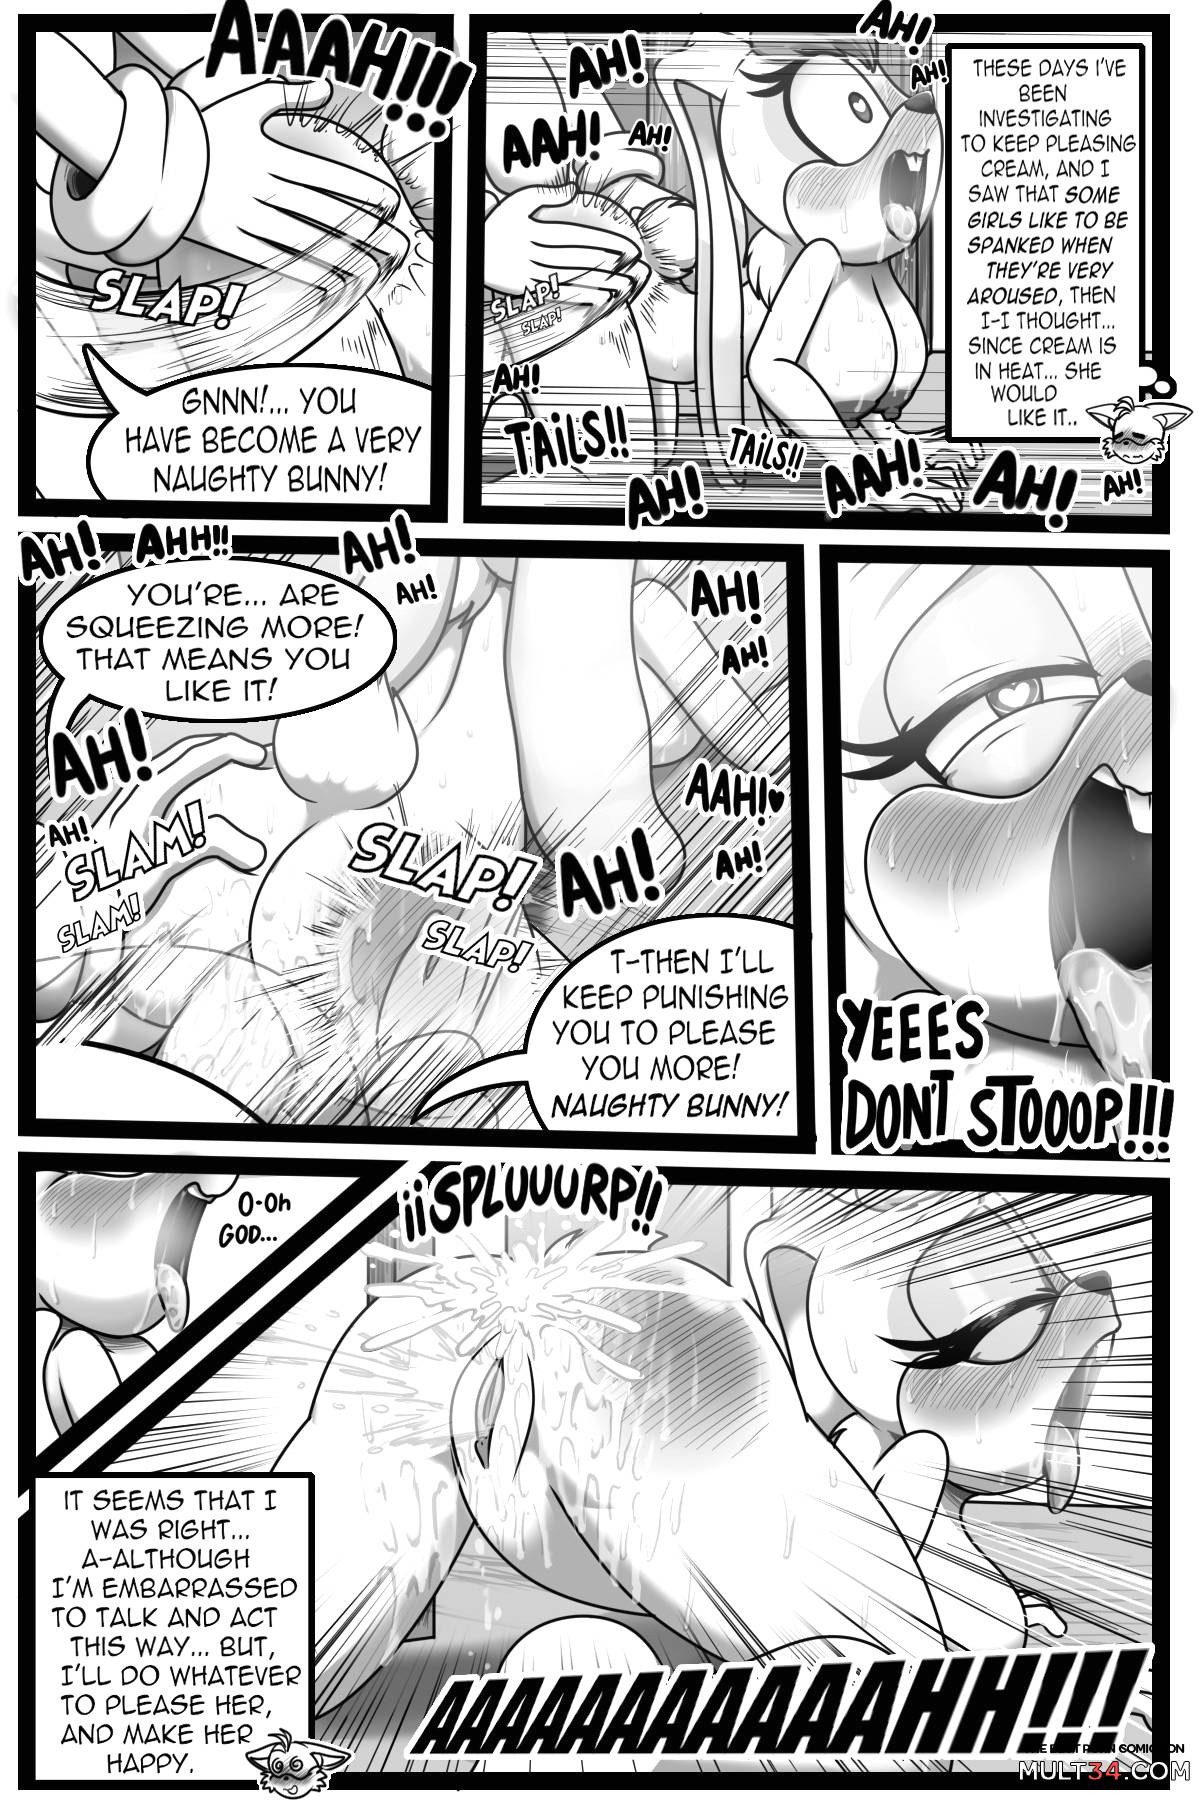 Please Fuck Me: Cream x Tail - Extra Story! page 40